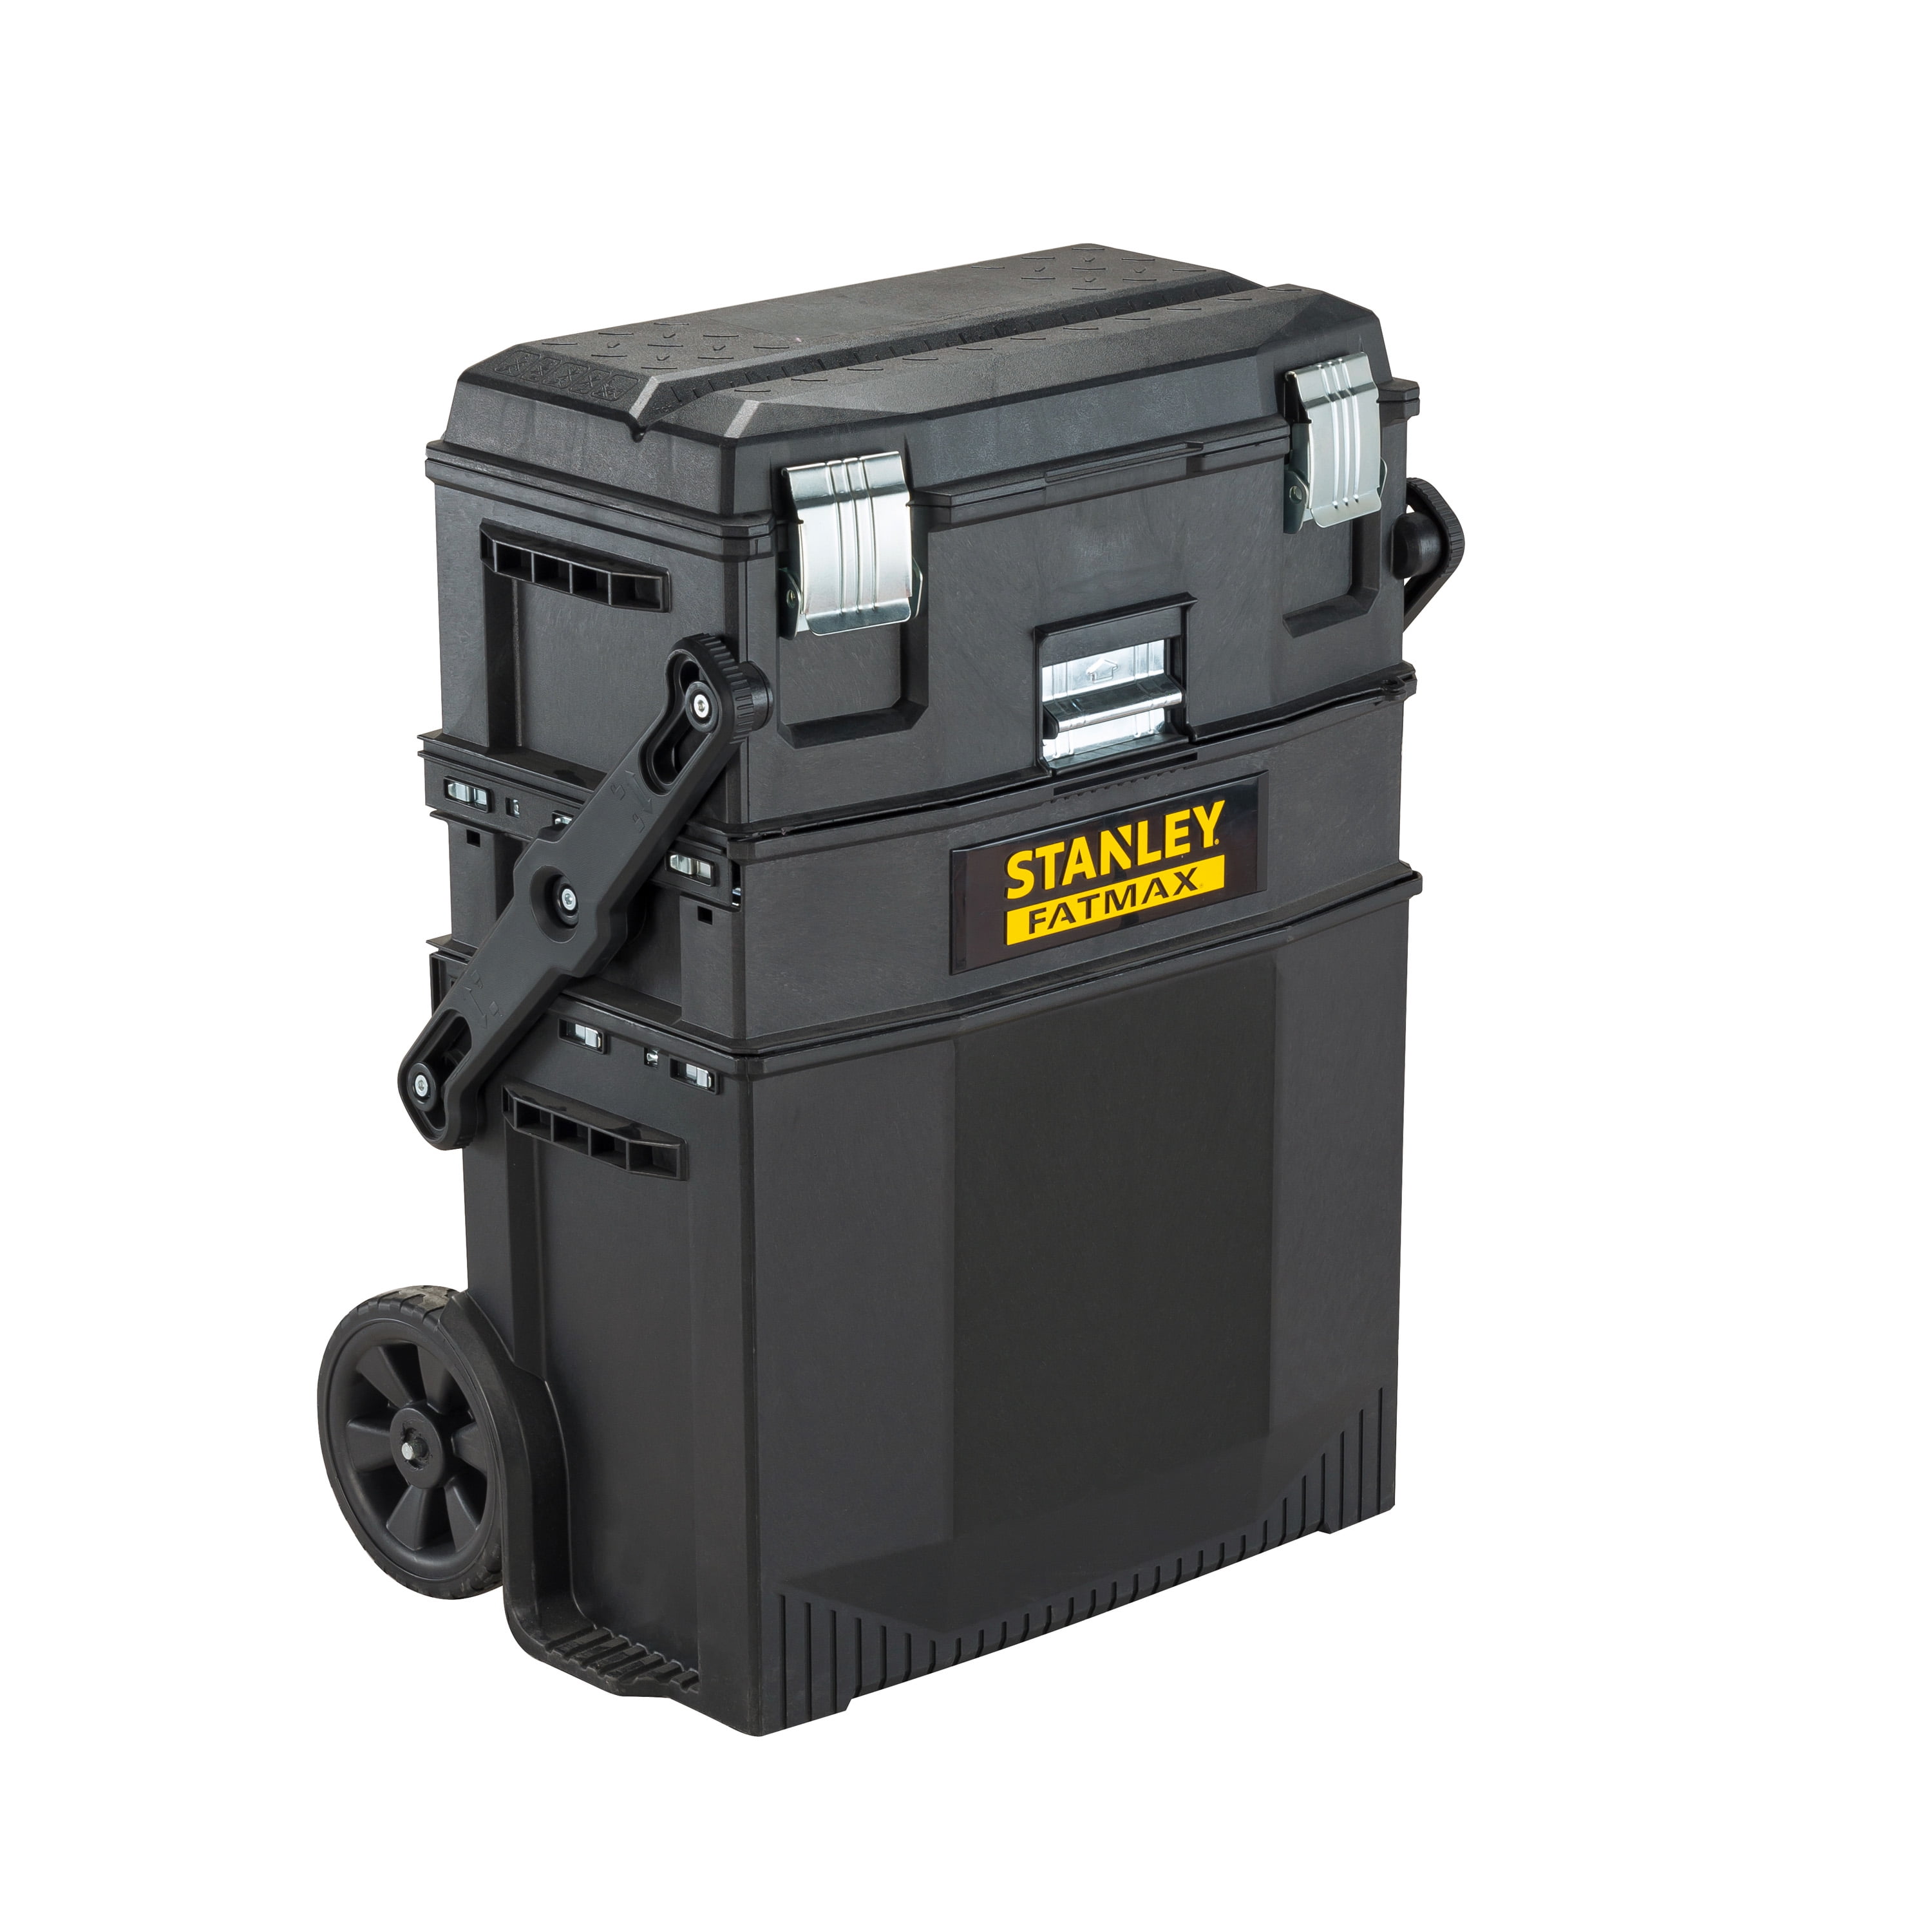 STANLEY FATMAX 020800R 4-in-1 Mobile Work Station